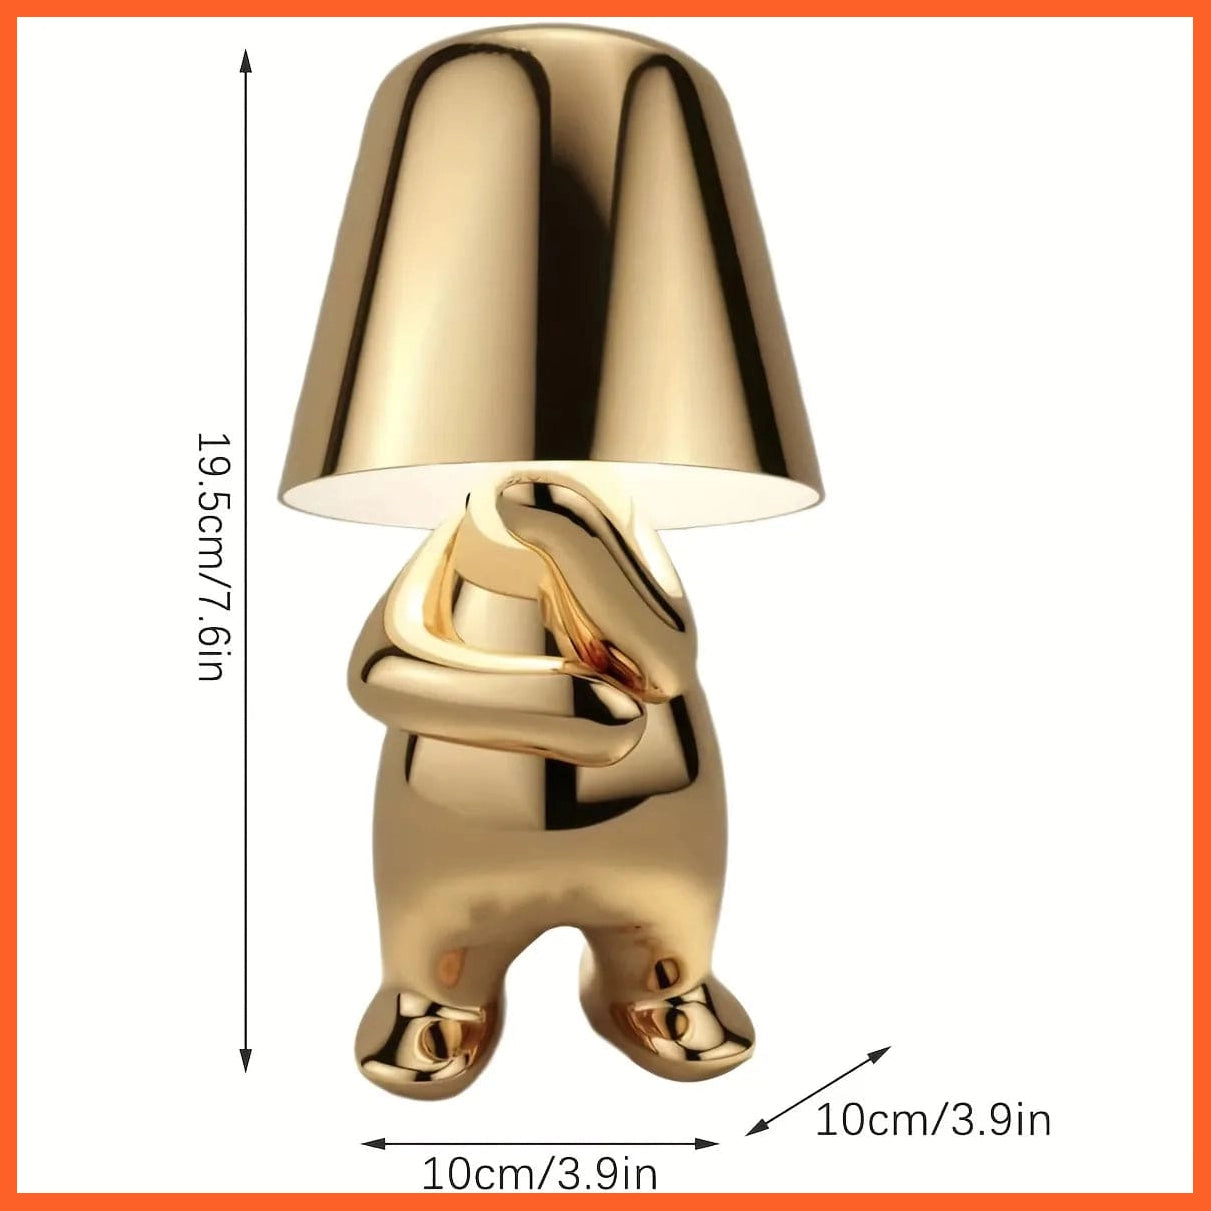 whatagift.com.au Golden Color Thinker Statue LED Table Lamp With USB Port| Nightstand Lamp For Home, Living Room